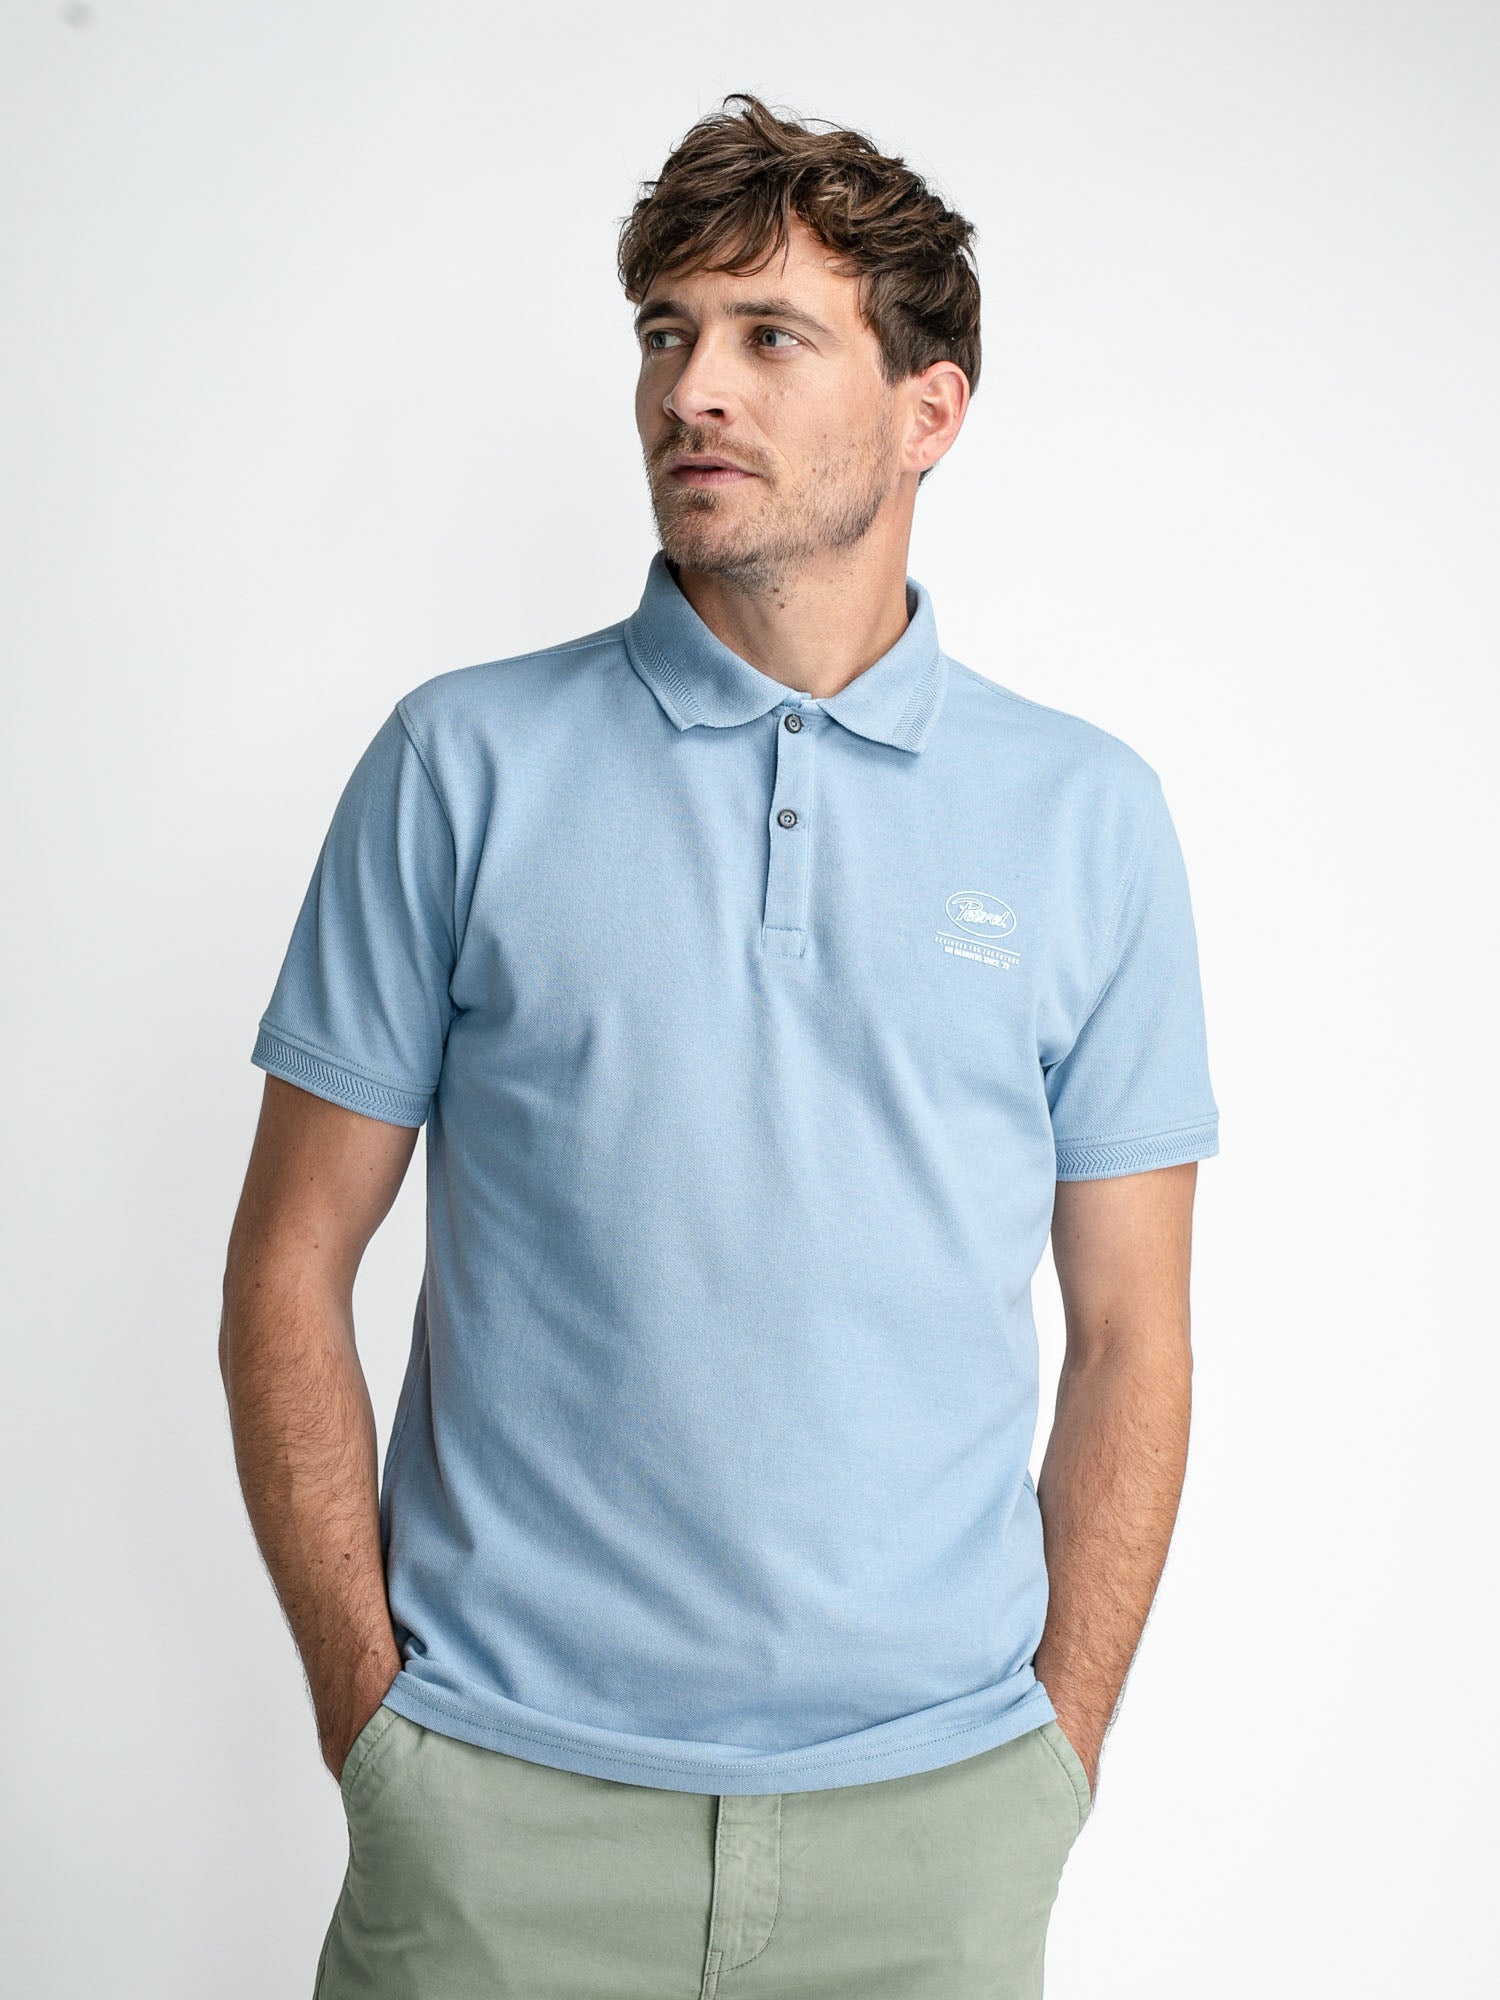 Classic polo shirt | Official Petrol Industries® webshop